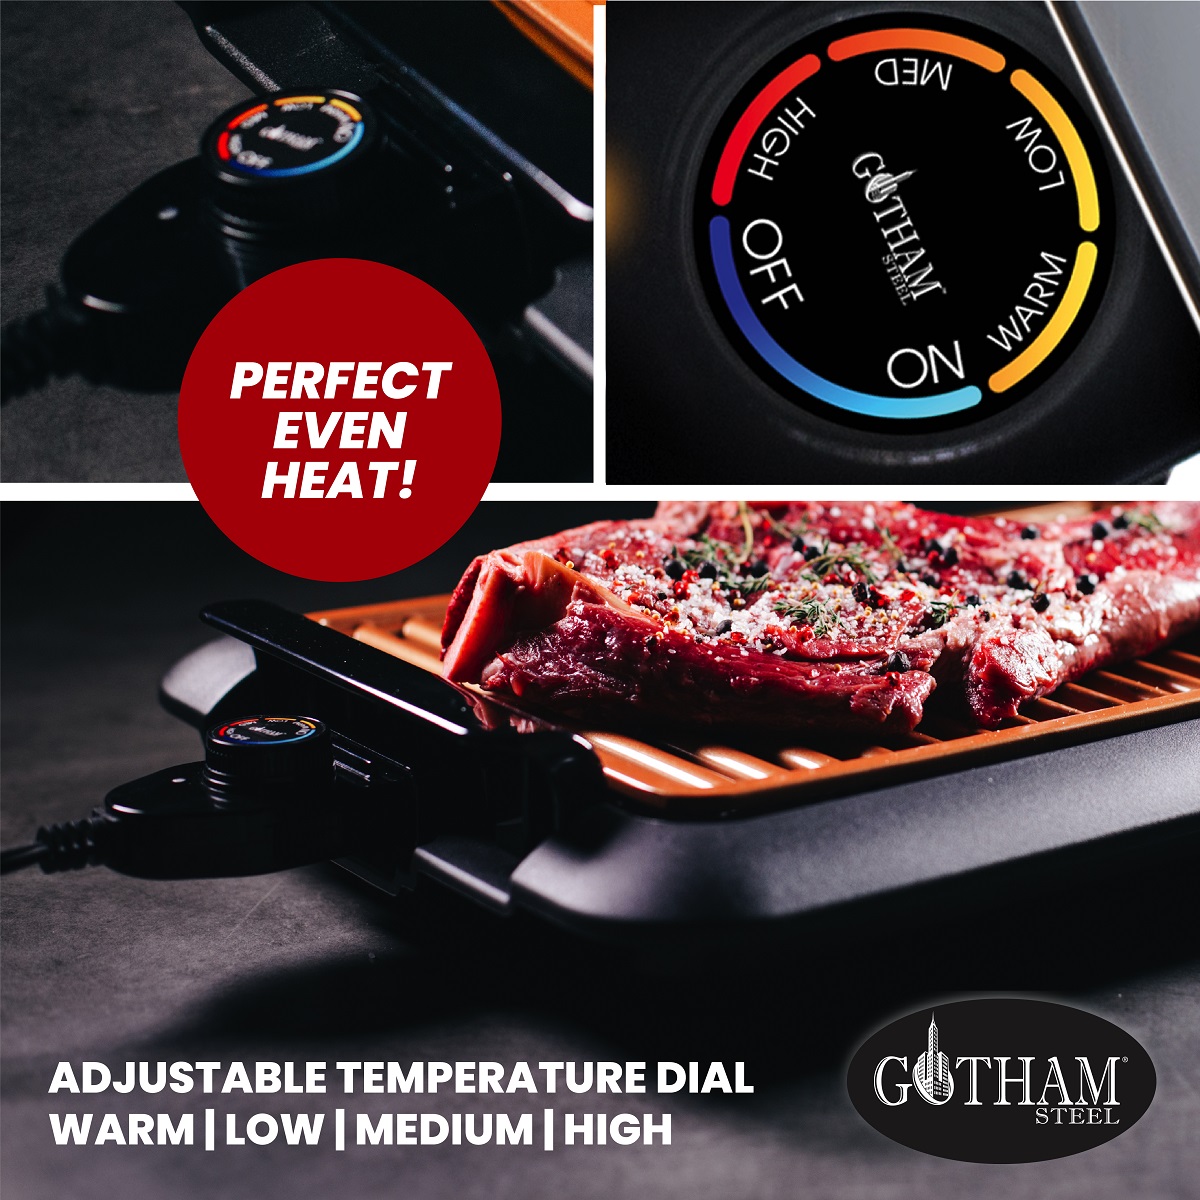 Gotham Steel Smokeless Indoor Grill, Ultra Nonstick Electric Grill, Dishwasher Safe Surface, Temp Control, Metal Utensil Safe, Barbeque Indoors with No Smoke! - image 4 of 7